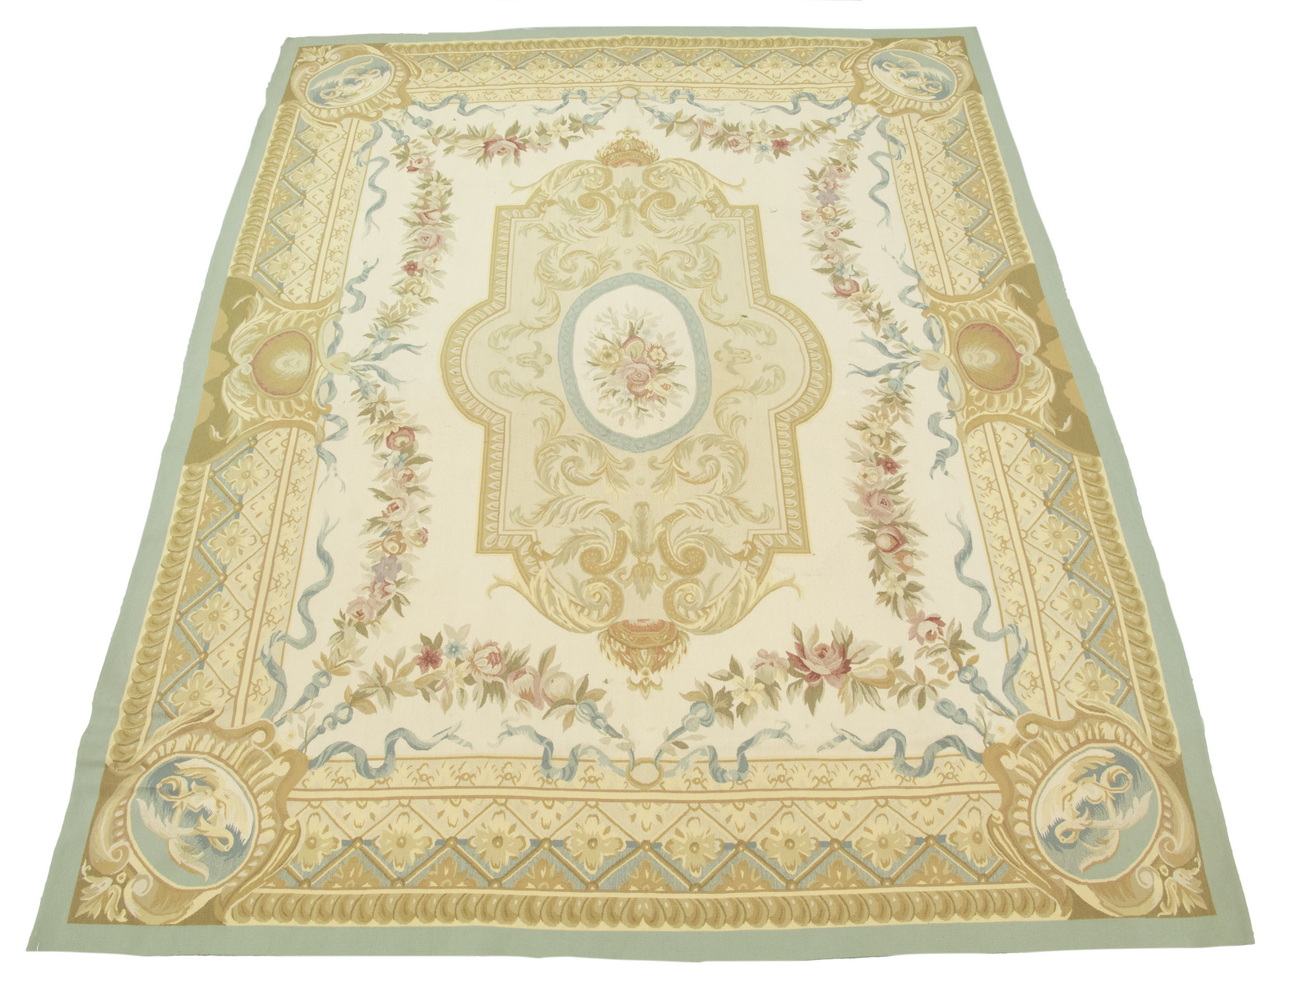 AUBUSSON STYLE TAPESTRY CARPET 302a79